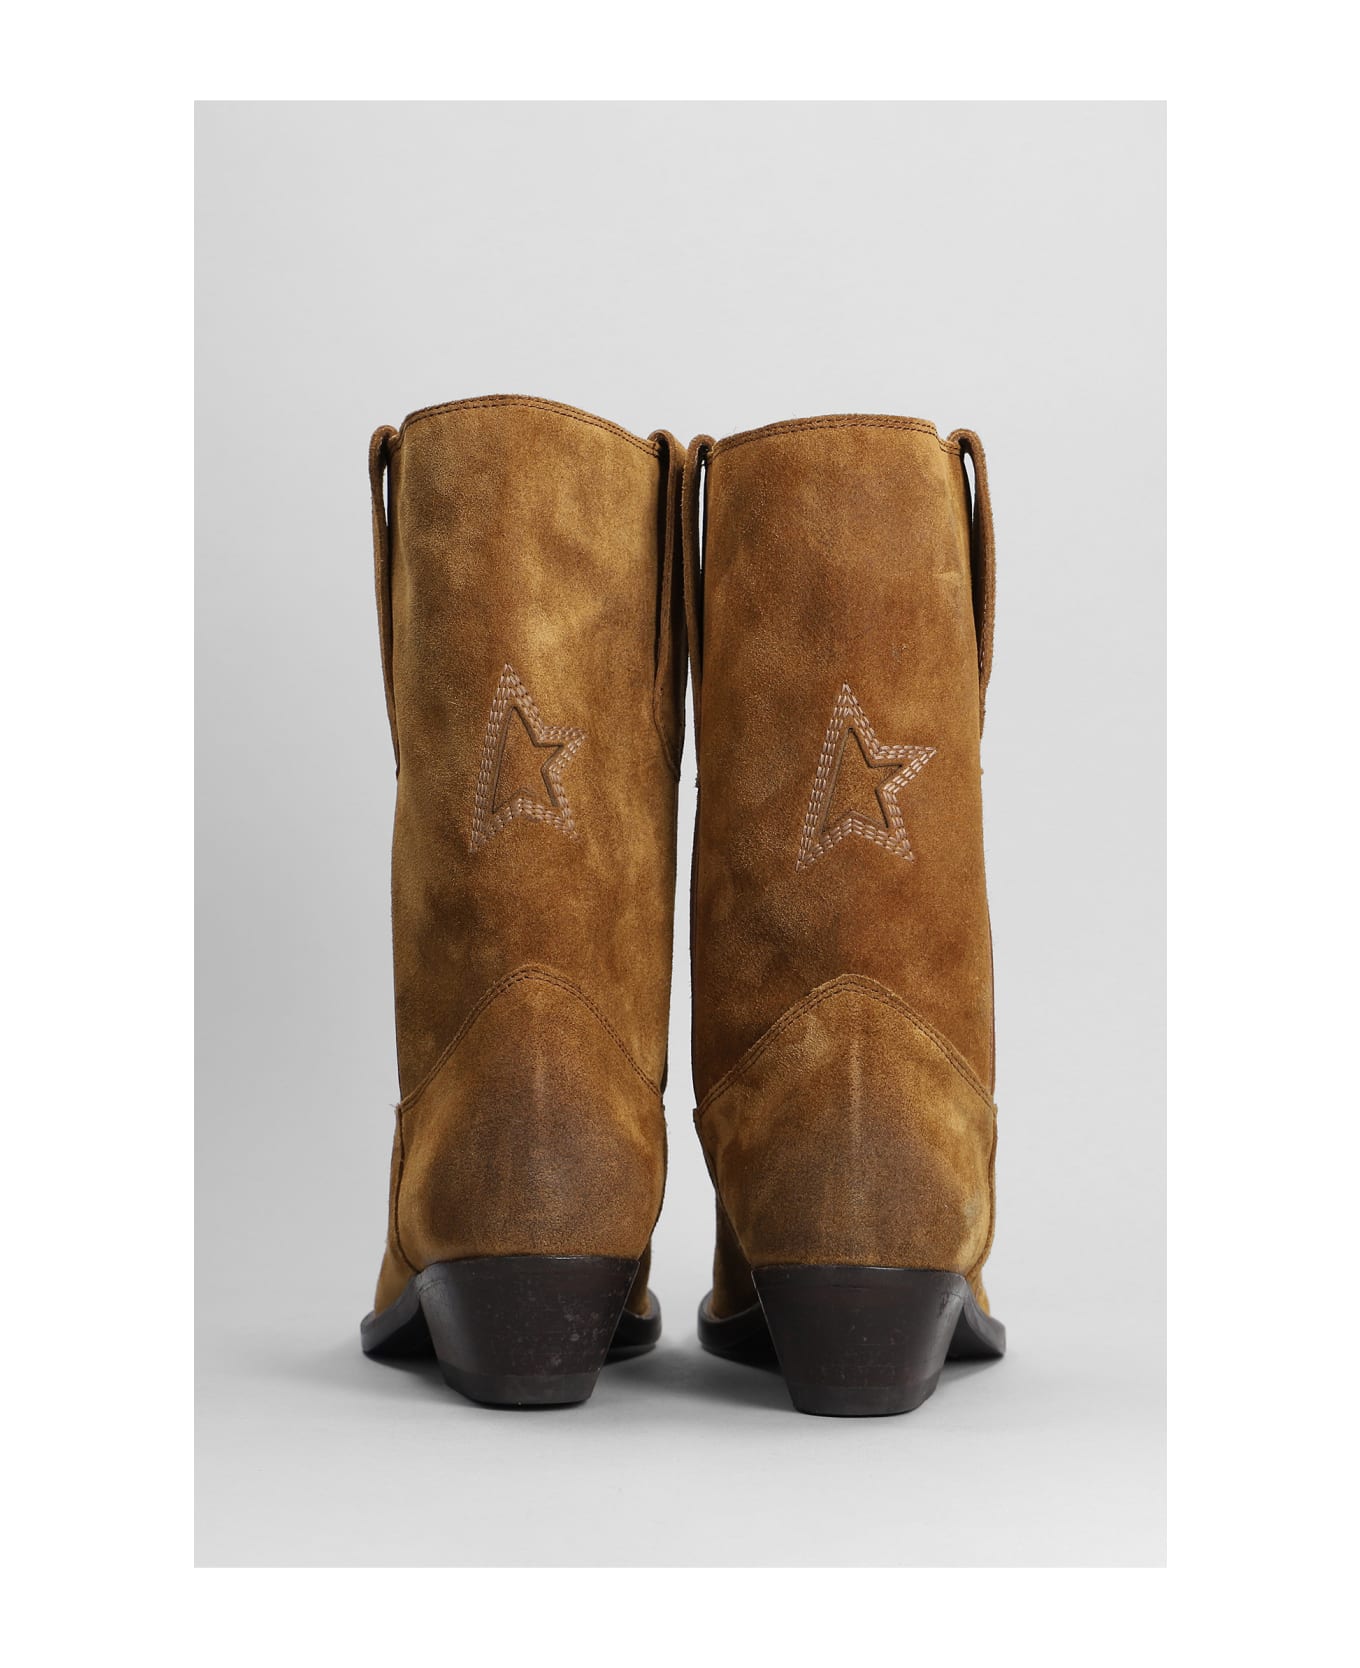 Golden Goose Wish Star Texan Boots In Leather Color Suede - leather color